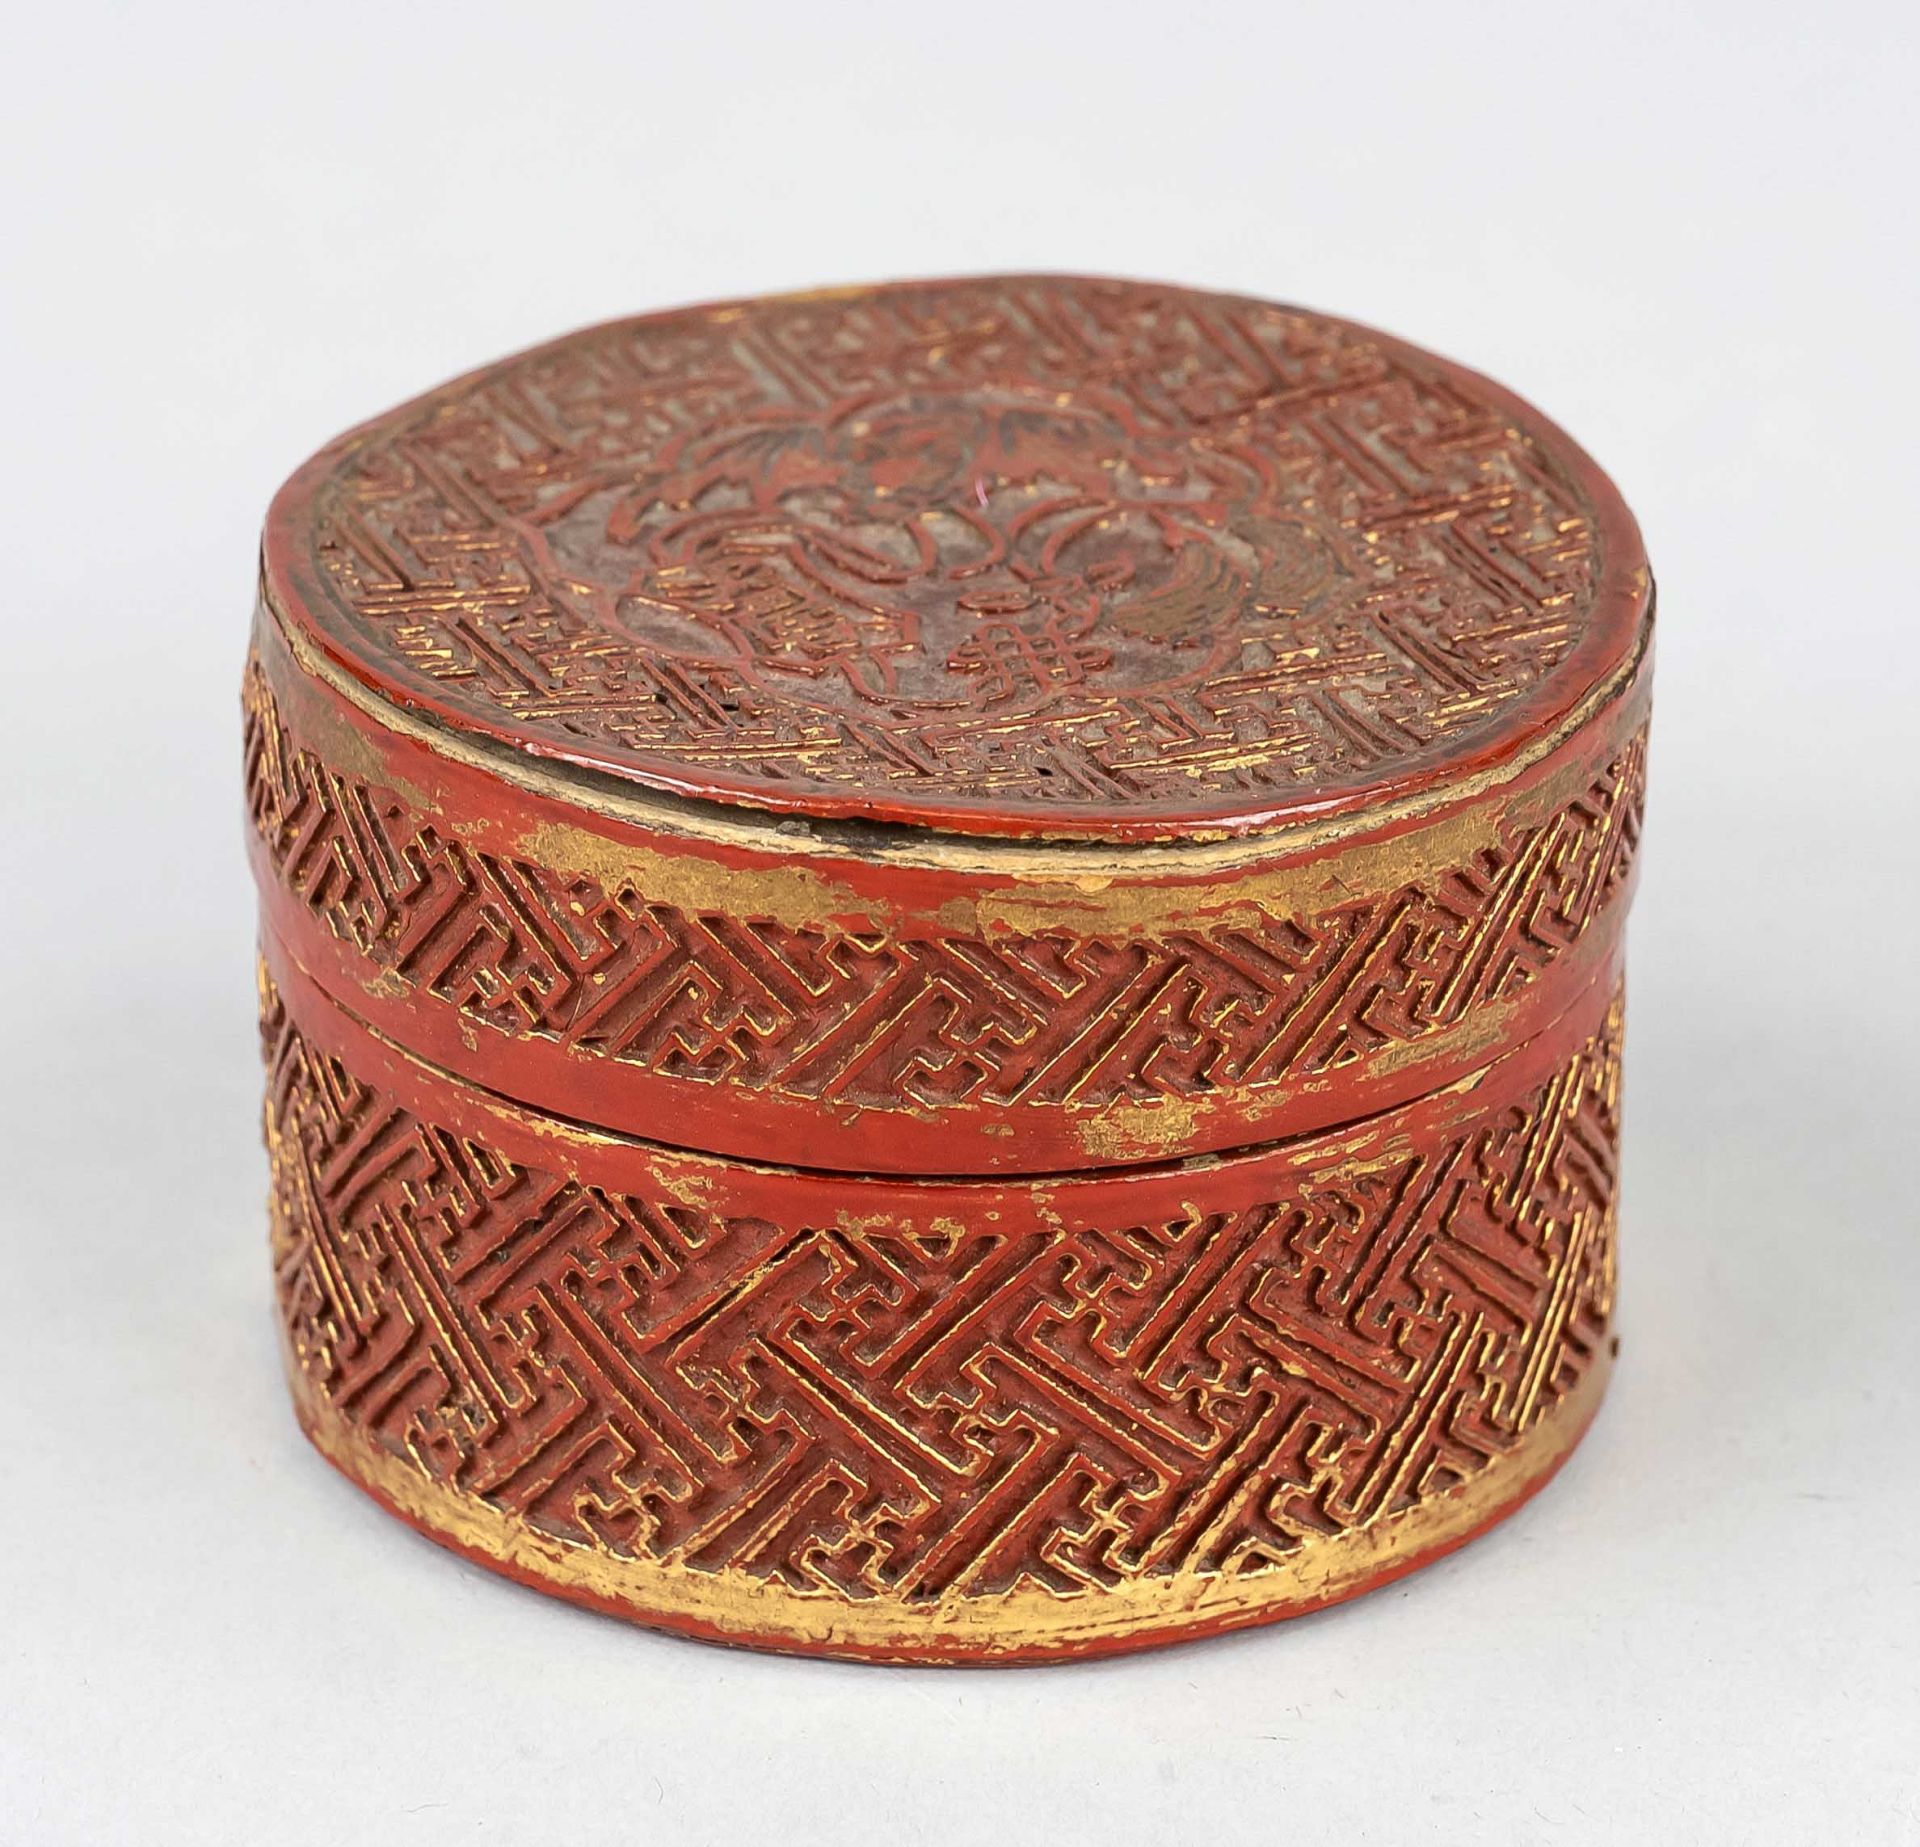 Red lacquer box, China, around 1900, wooden body with red lacquer, repeat pattern decorated by